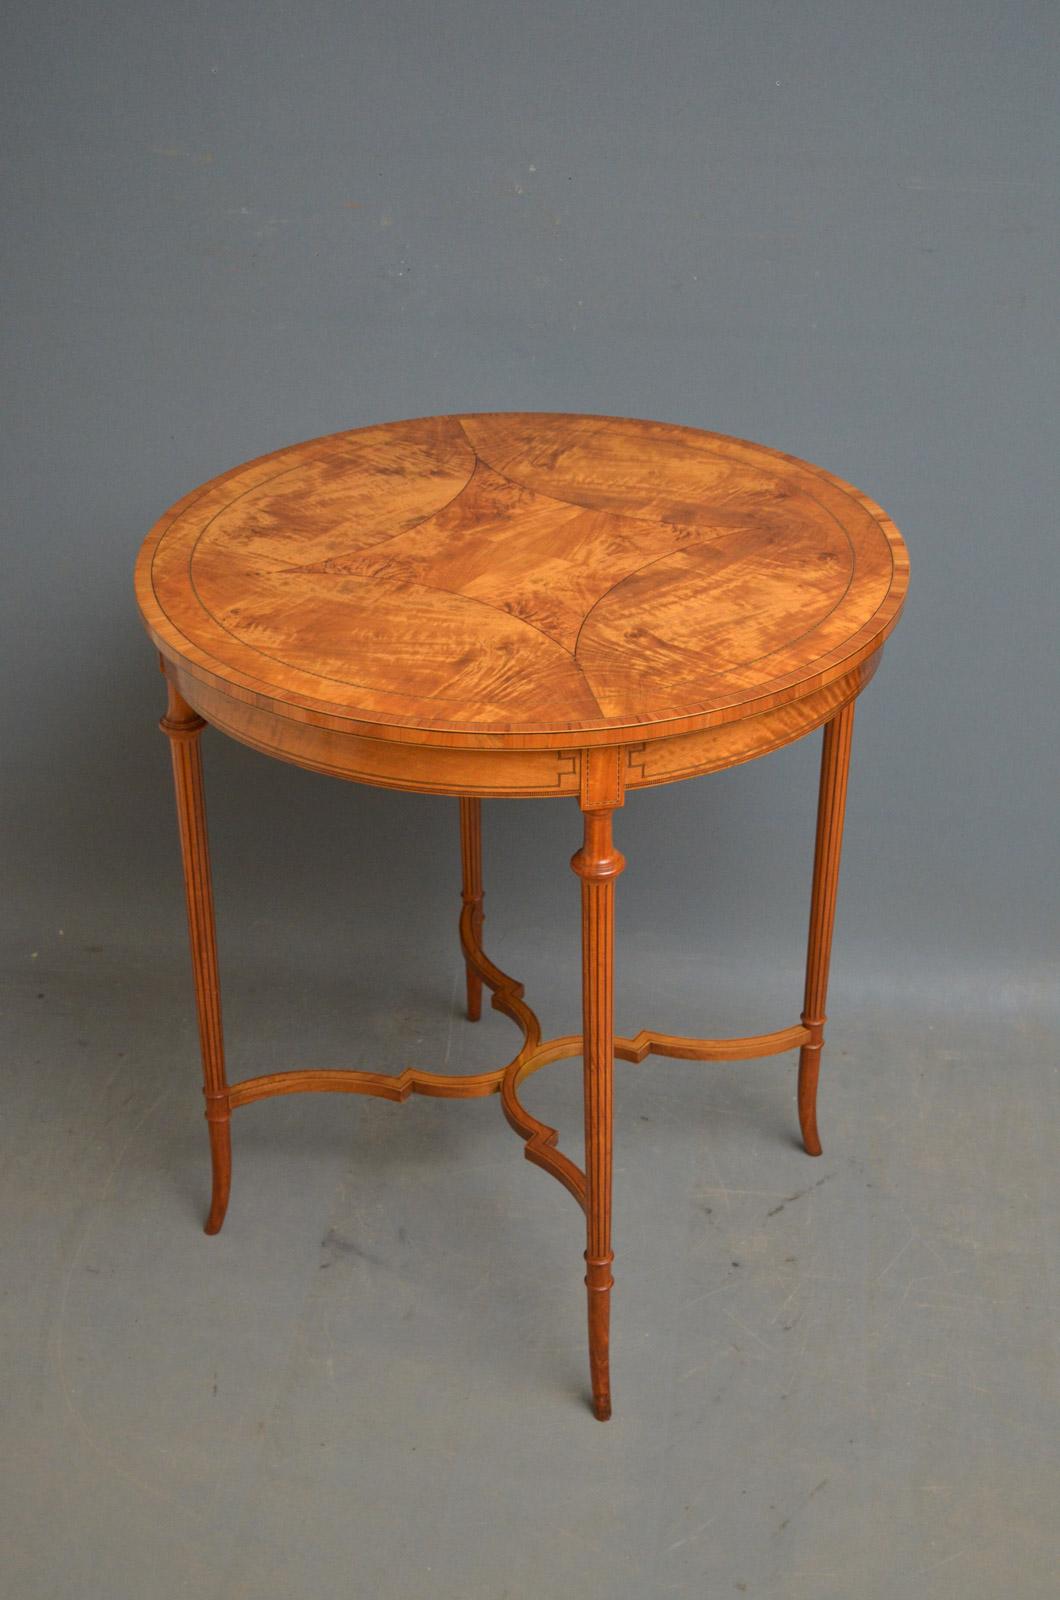 Sn4490 Fine quality and very elegant Edwardian satinwood occasional table, having stunning top with inlay decoration above inlaid frieze and 4 slender, string inlaid legs united by shaped stretchers. This antique table retains its original soft and